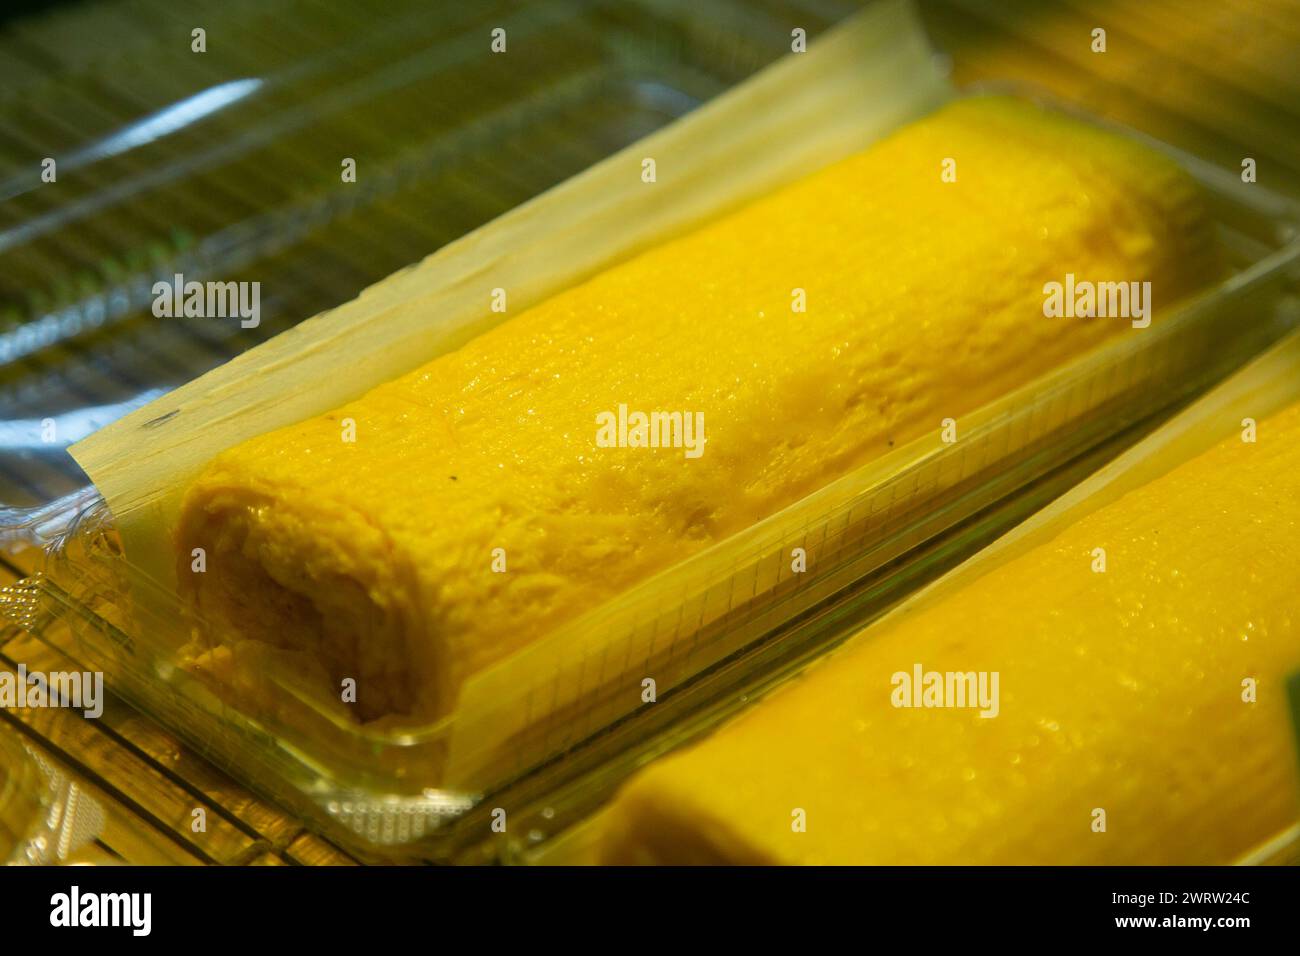 Tamago  is a Japanese omelet. It's made by rolling together thin layers of fried eggs, then slicing the log into rectangles. Stock Photo